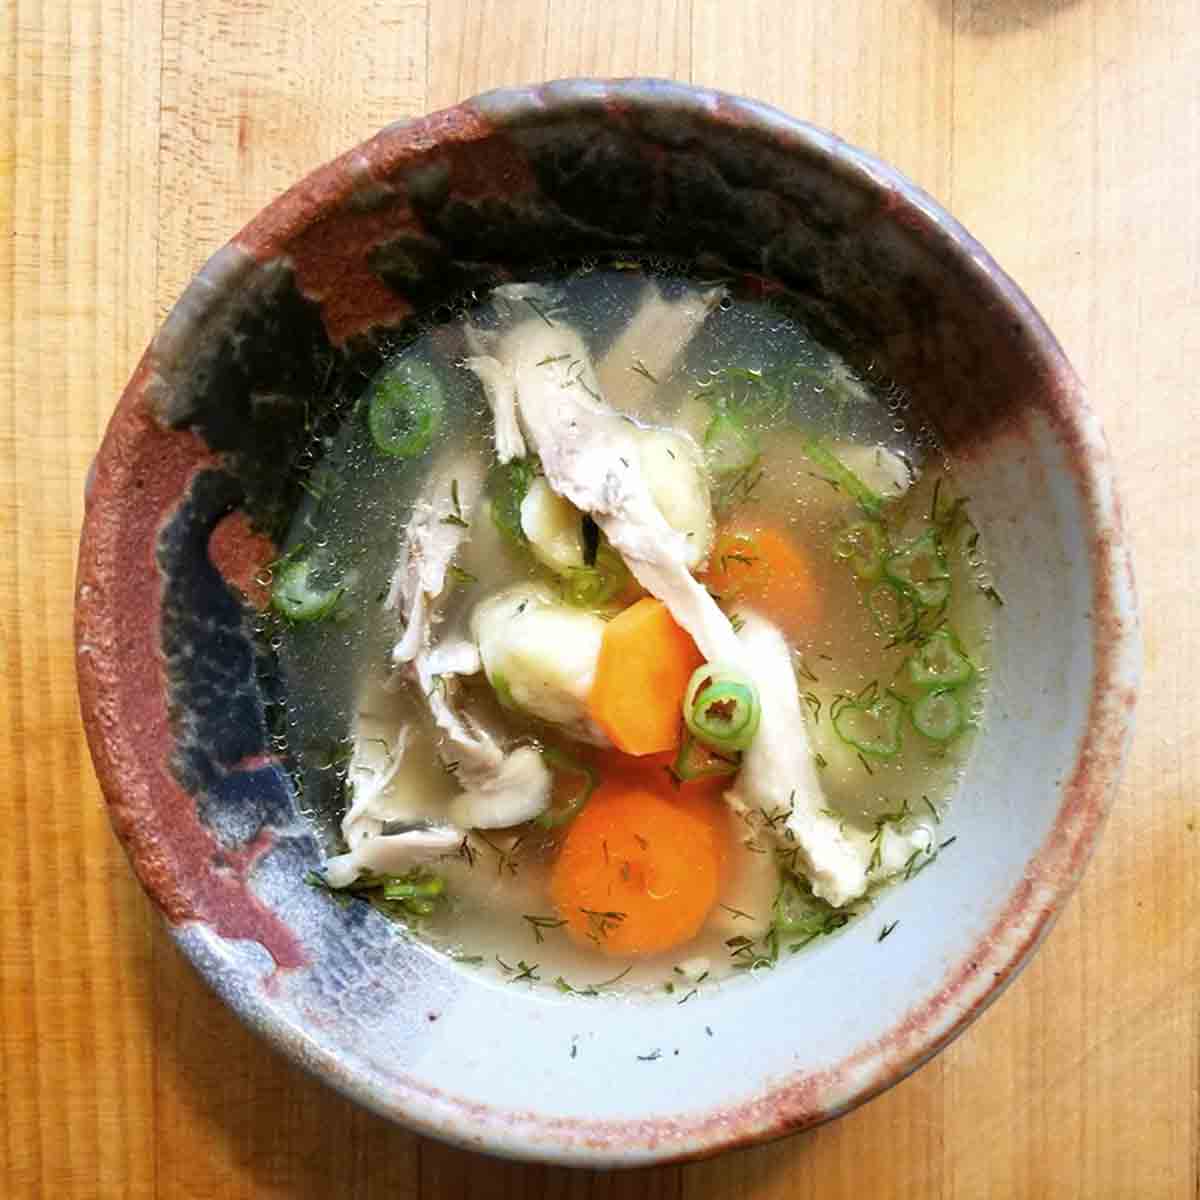 A bowl of Ukrainian chicken dumpling soup with shredded chicken, carrots, scallions, and dill